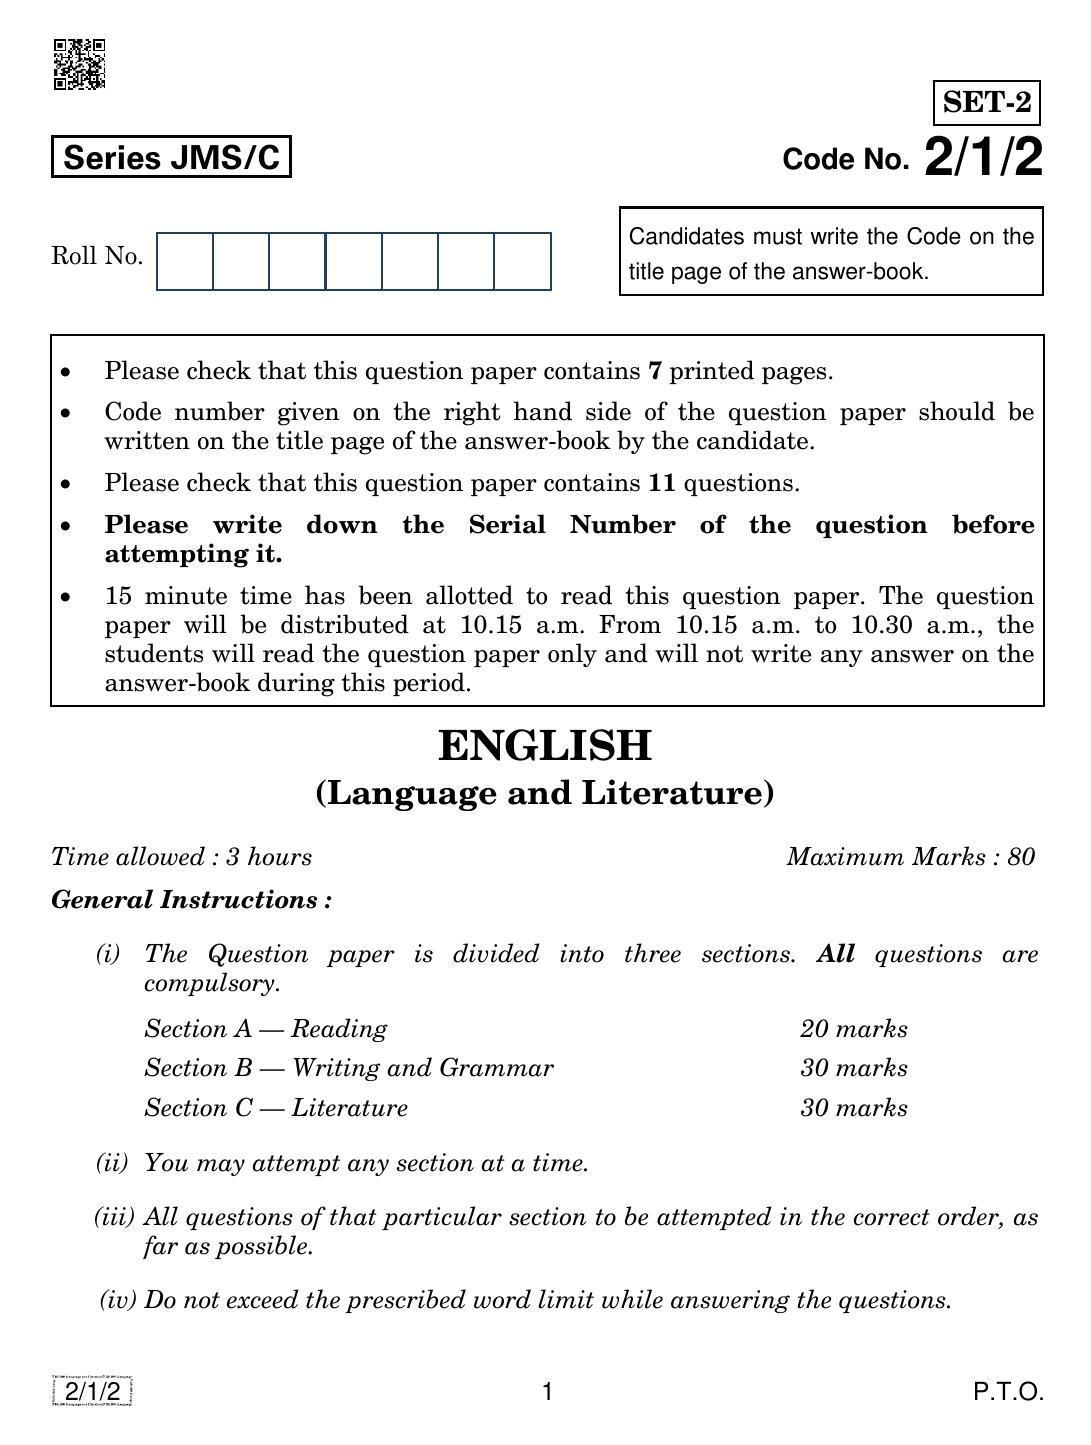 CBSE Class 10 2-1-2 ENGLISH LANG. & LIT. 2019 Compartment Question Paper - Page 1